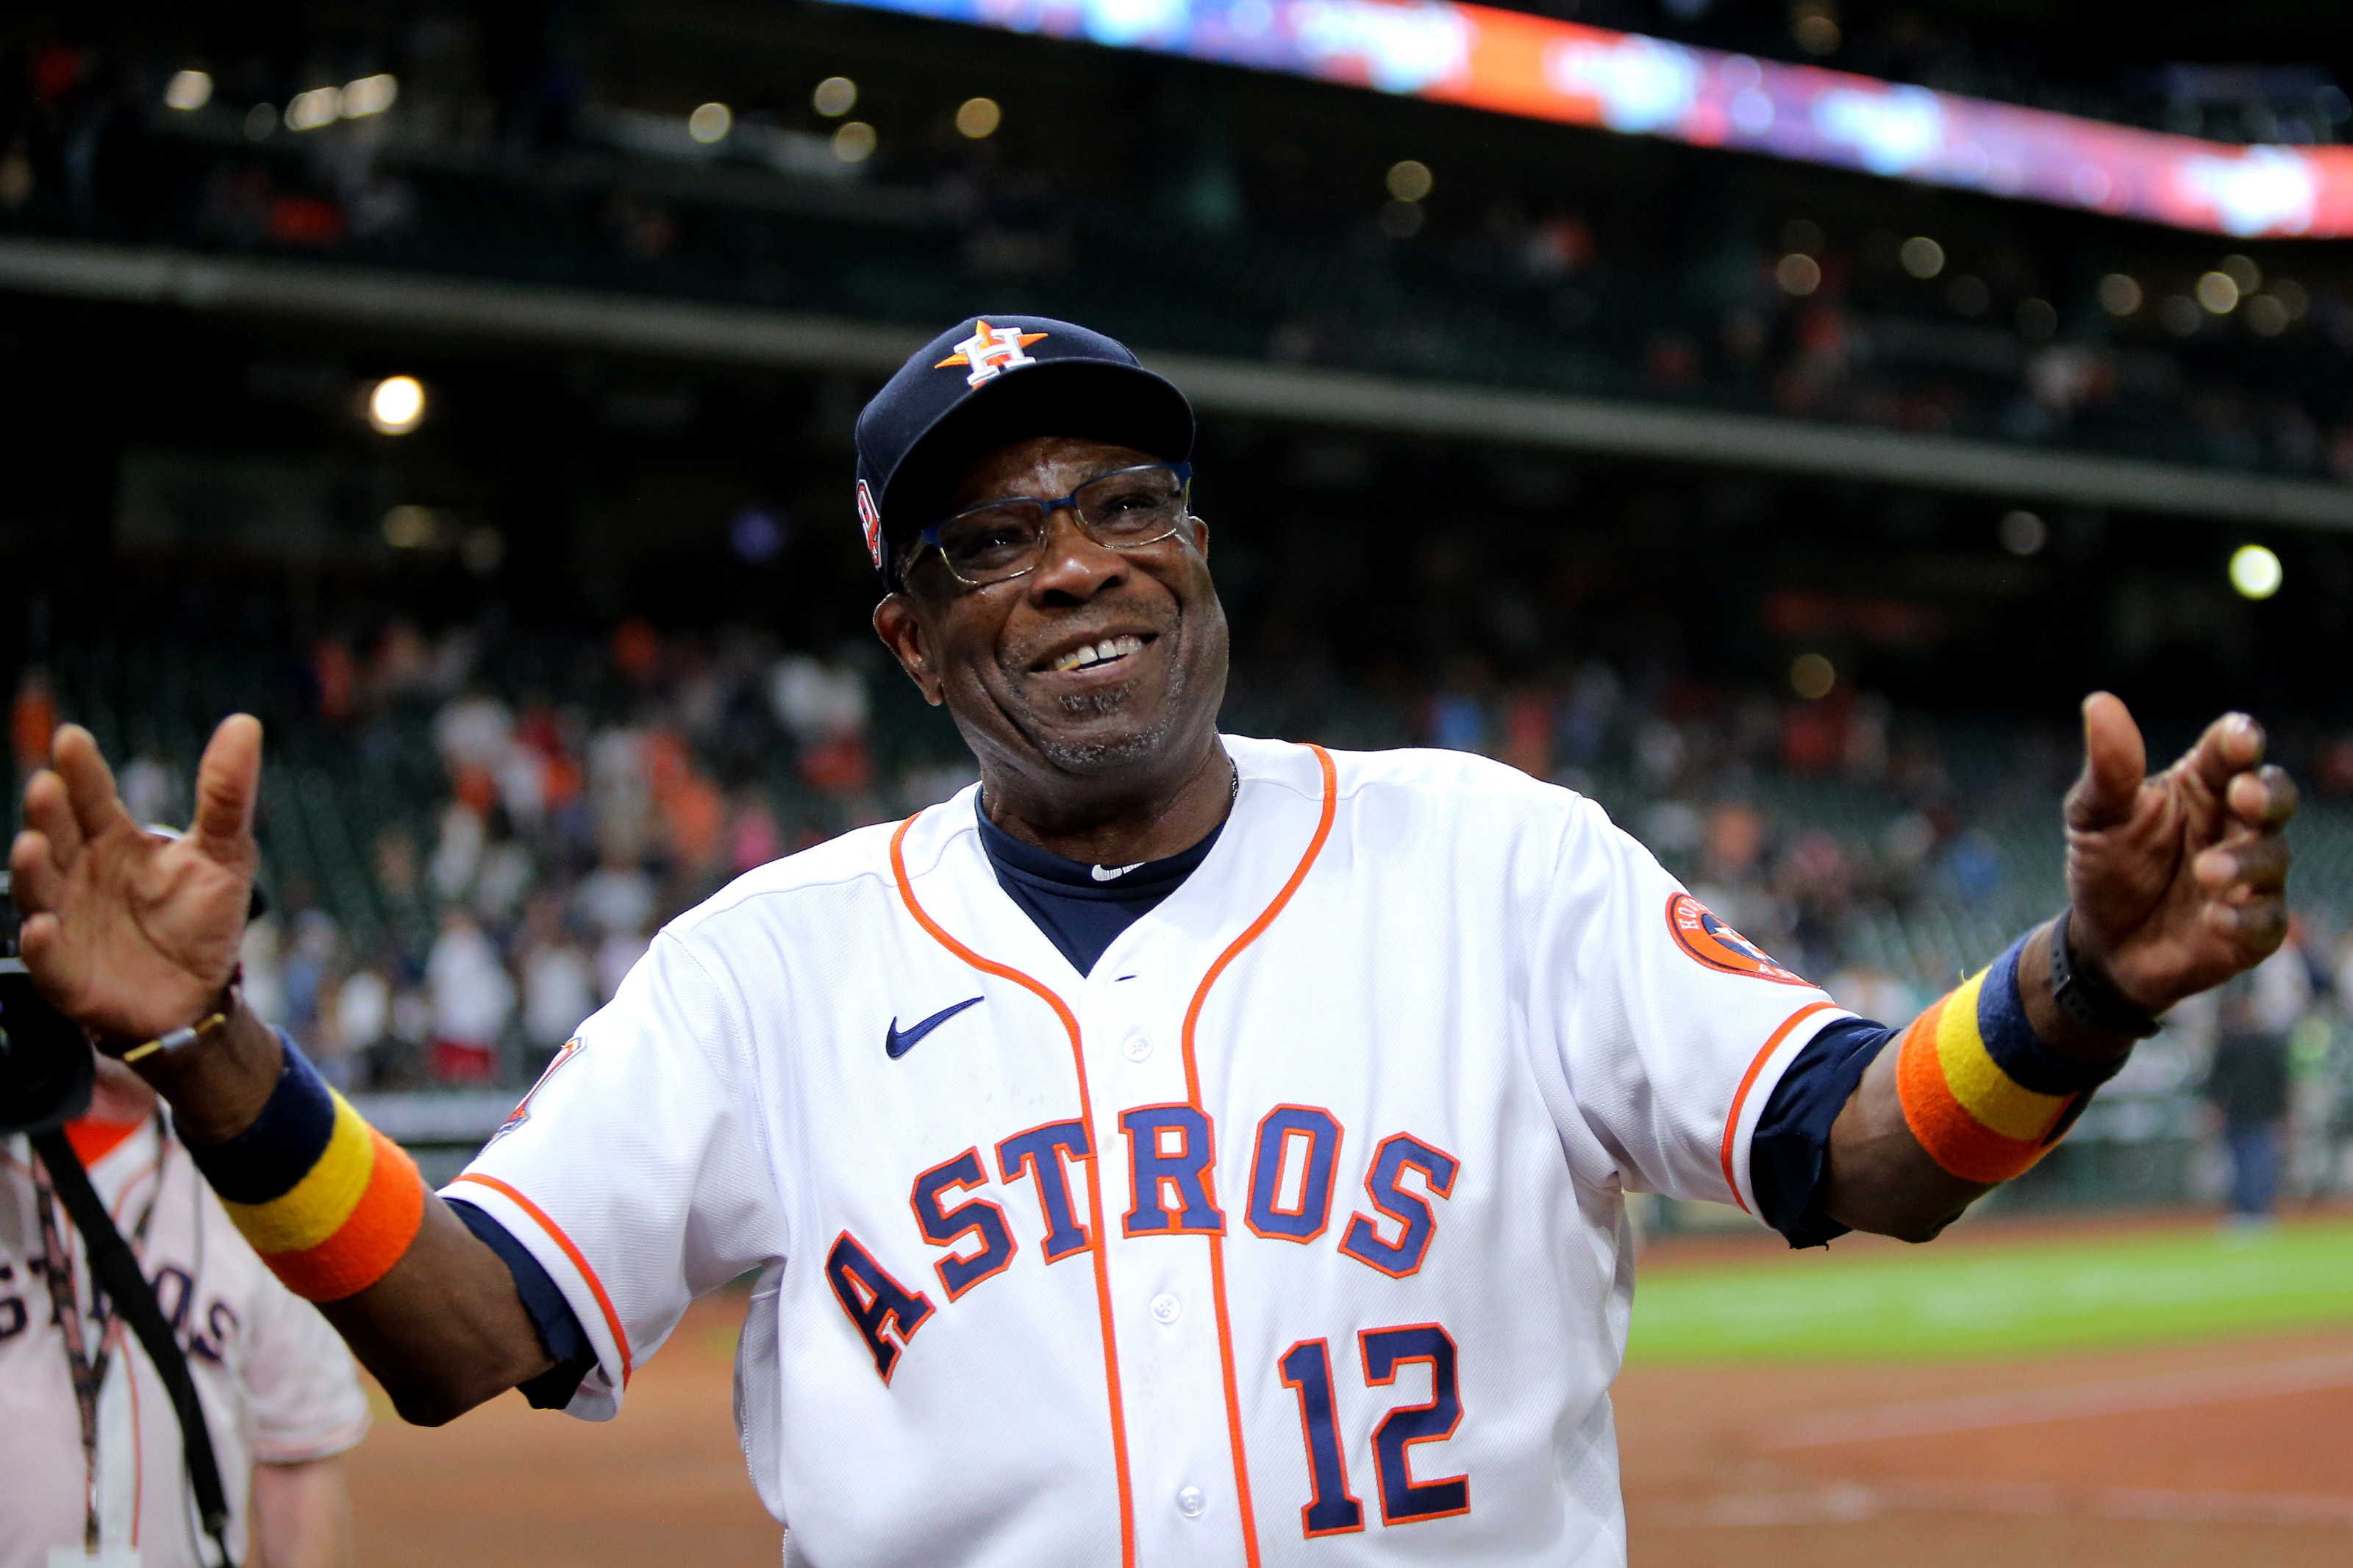 Houston Astros: Dusty Baker cements Hall of Fame legacy